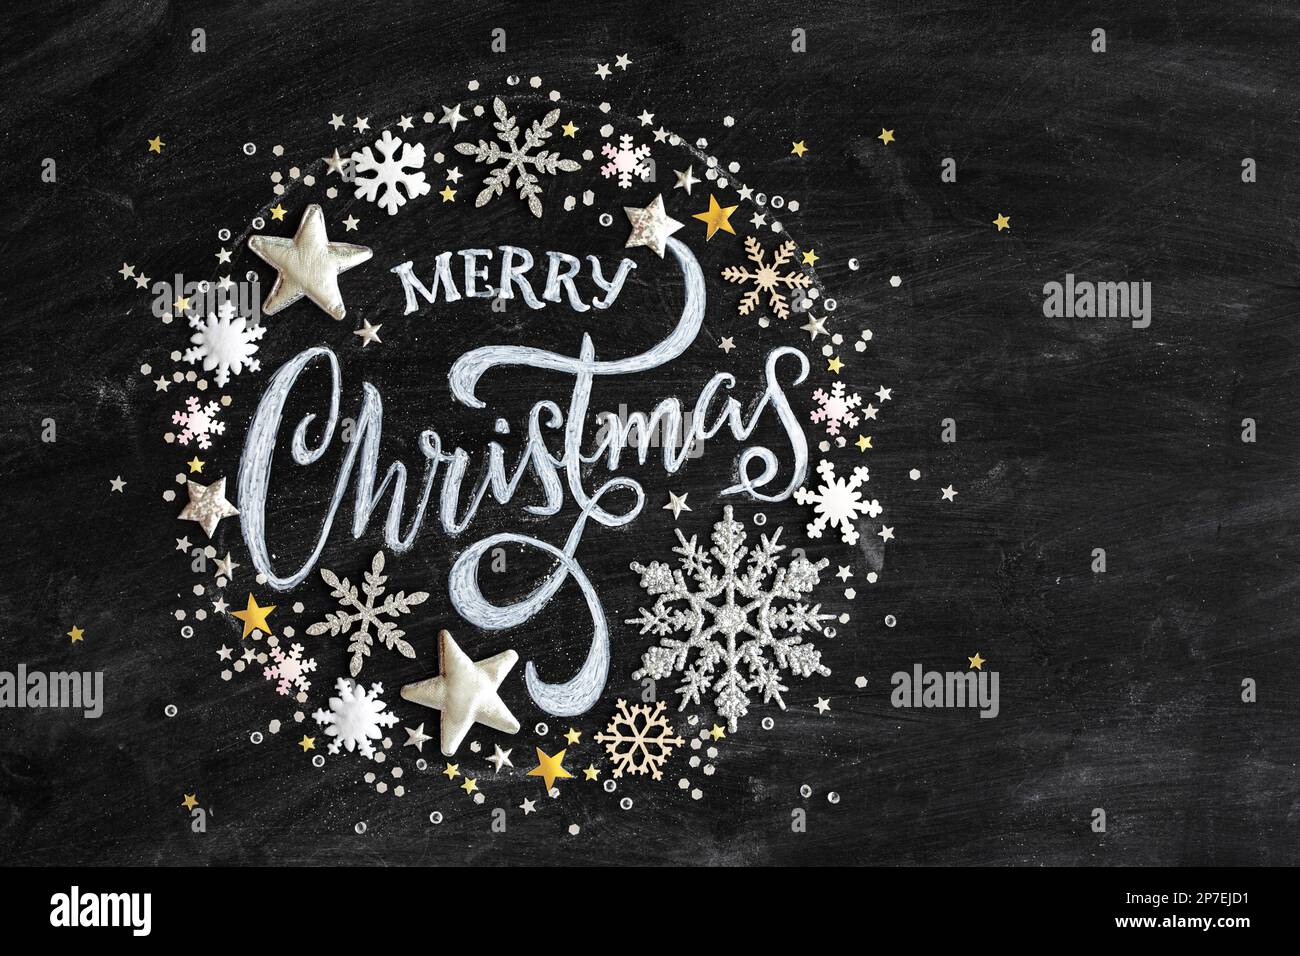 Merry Christmas written in chalk on a black chalkboard with confetti and Christmas decorations, flat lay viewed from above Stock Photo